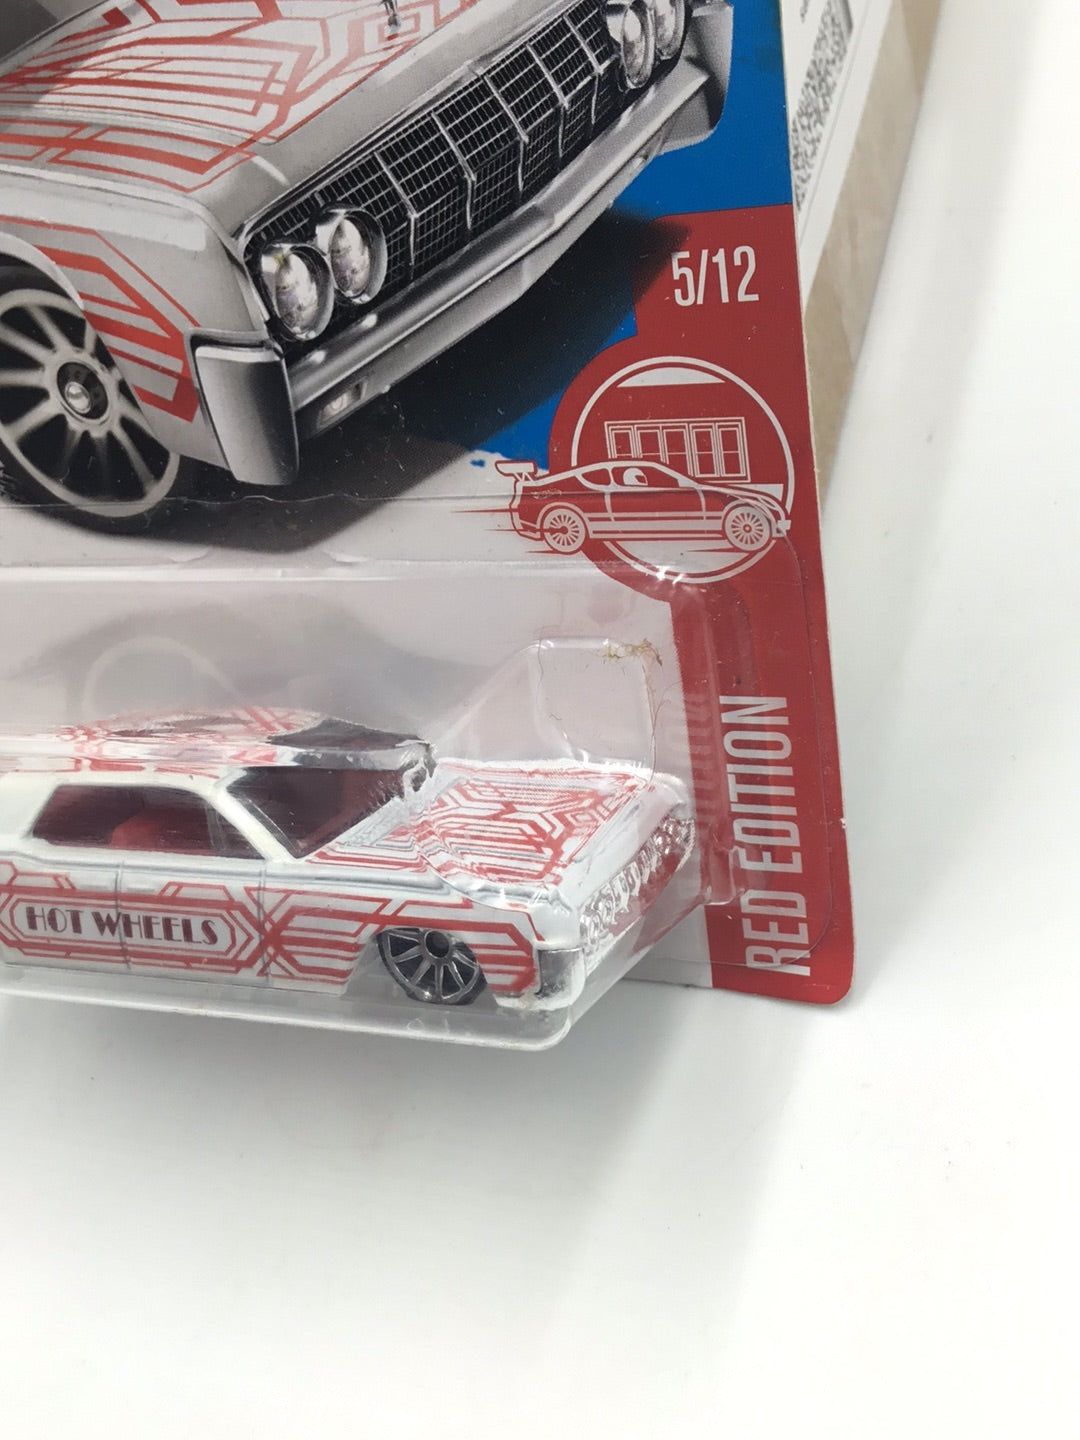 2017 hot wheels red edition 1964 Lincoln Continental target HH2